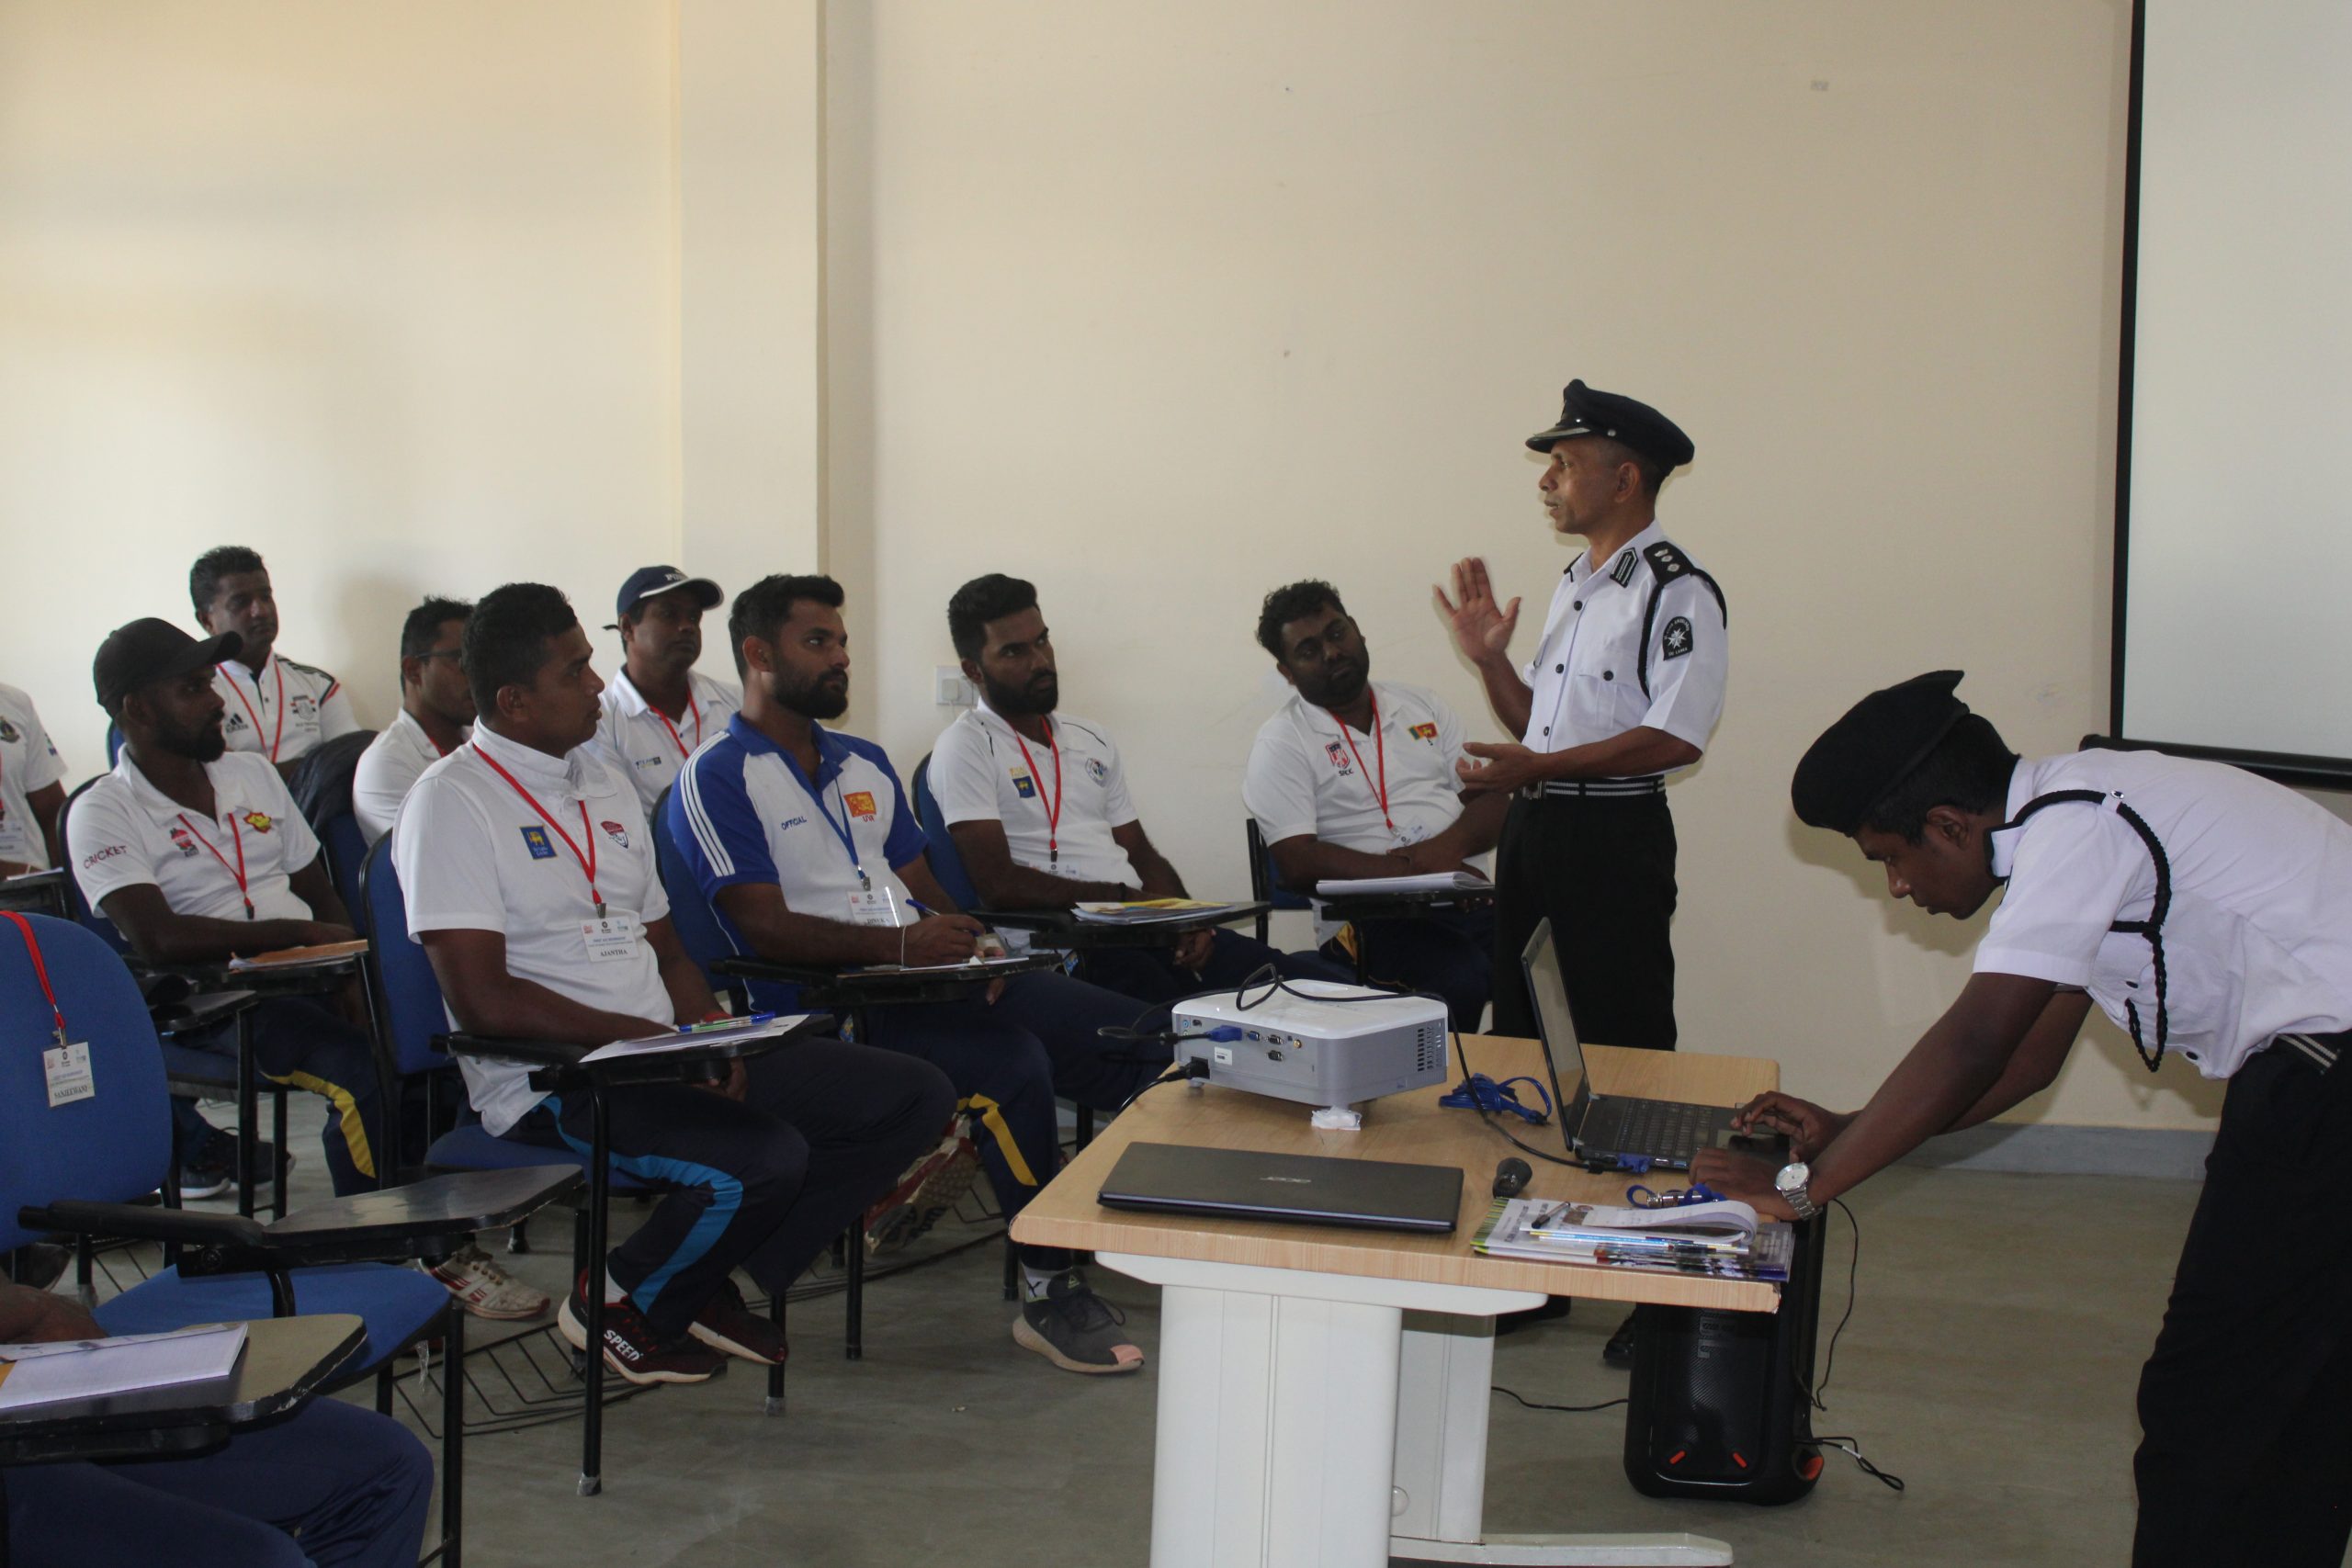 Uva Province Coach Education Unit Successfully organized “First Aid Certification” for Introduction to Cricket Program Participants.